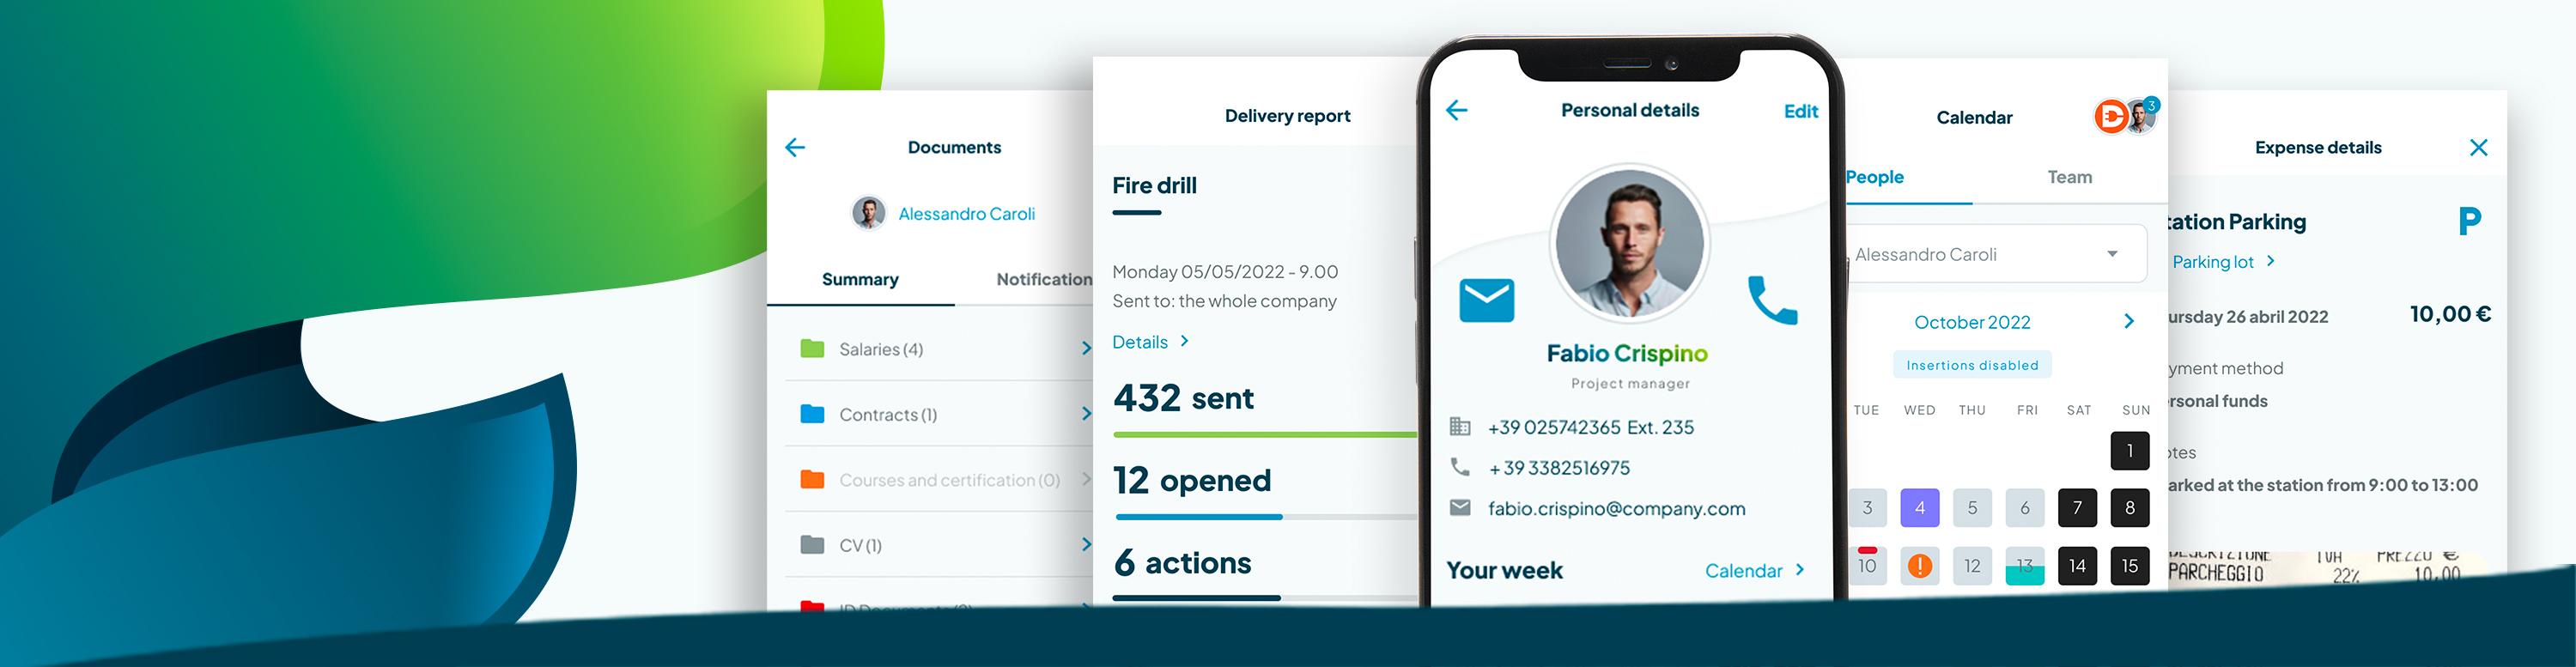 Review Fluida: Simplifying the relationship between companies and employees - Appvizer